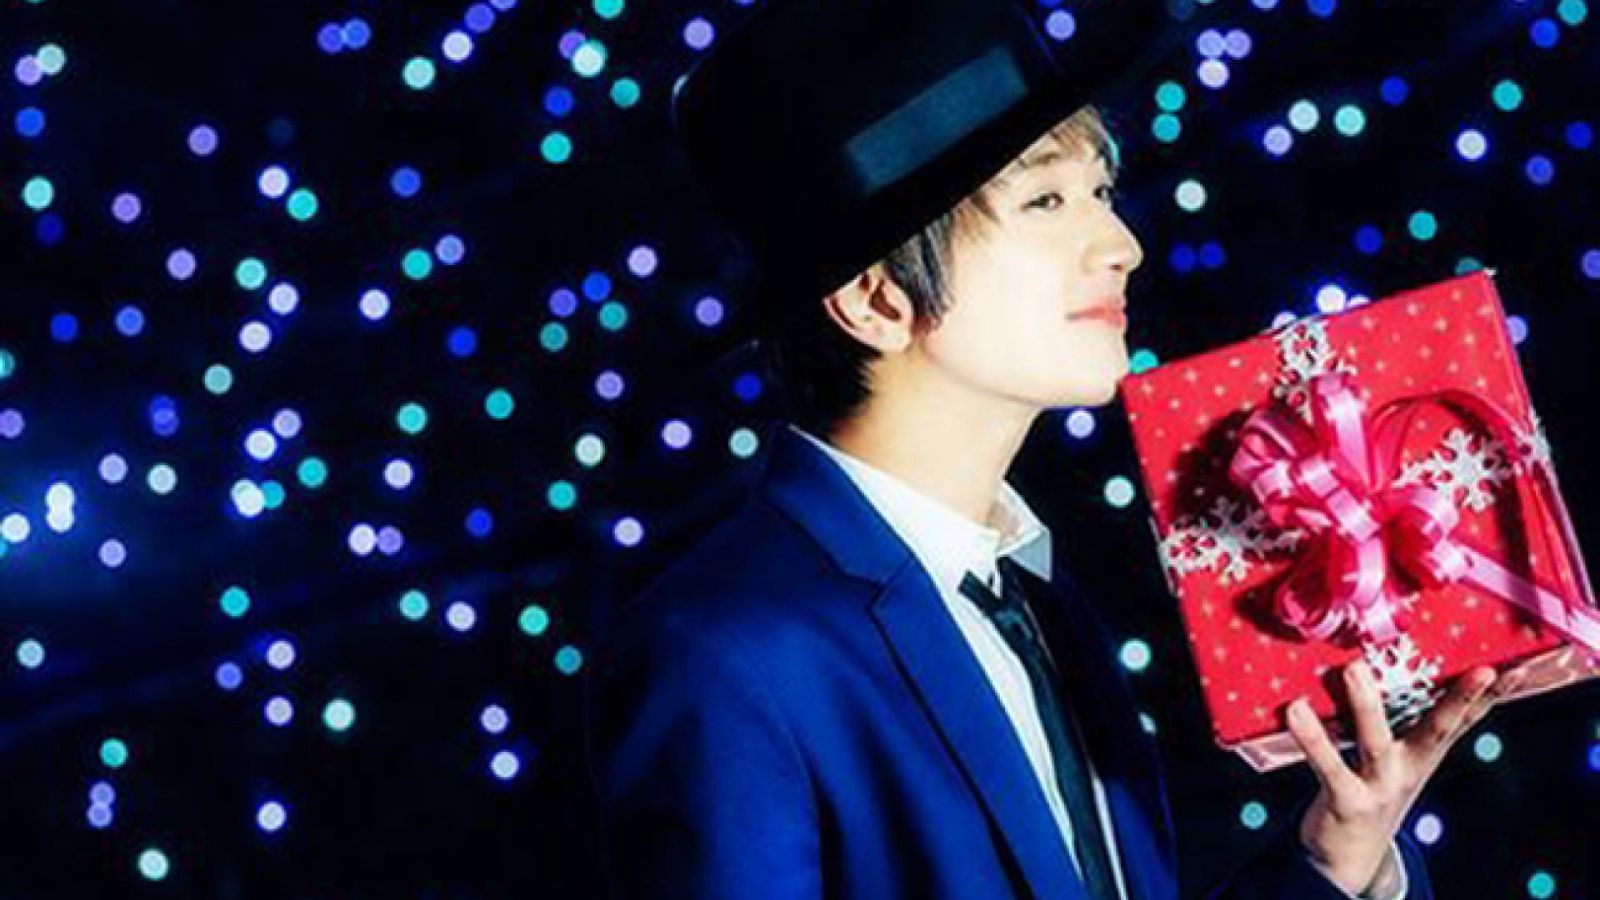 Premier album solo pour Nissy © avex management. All rights reserved.